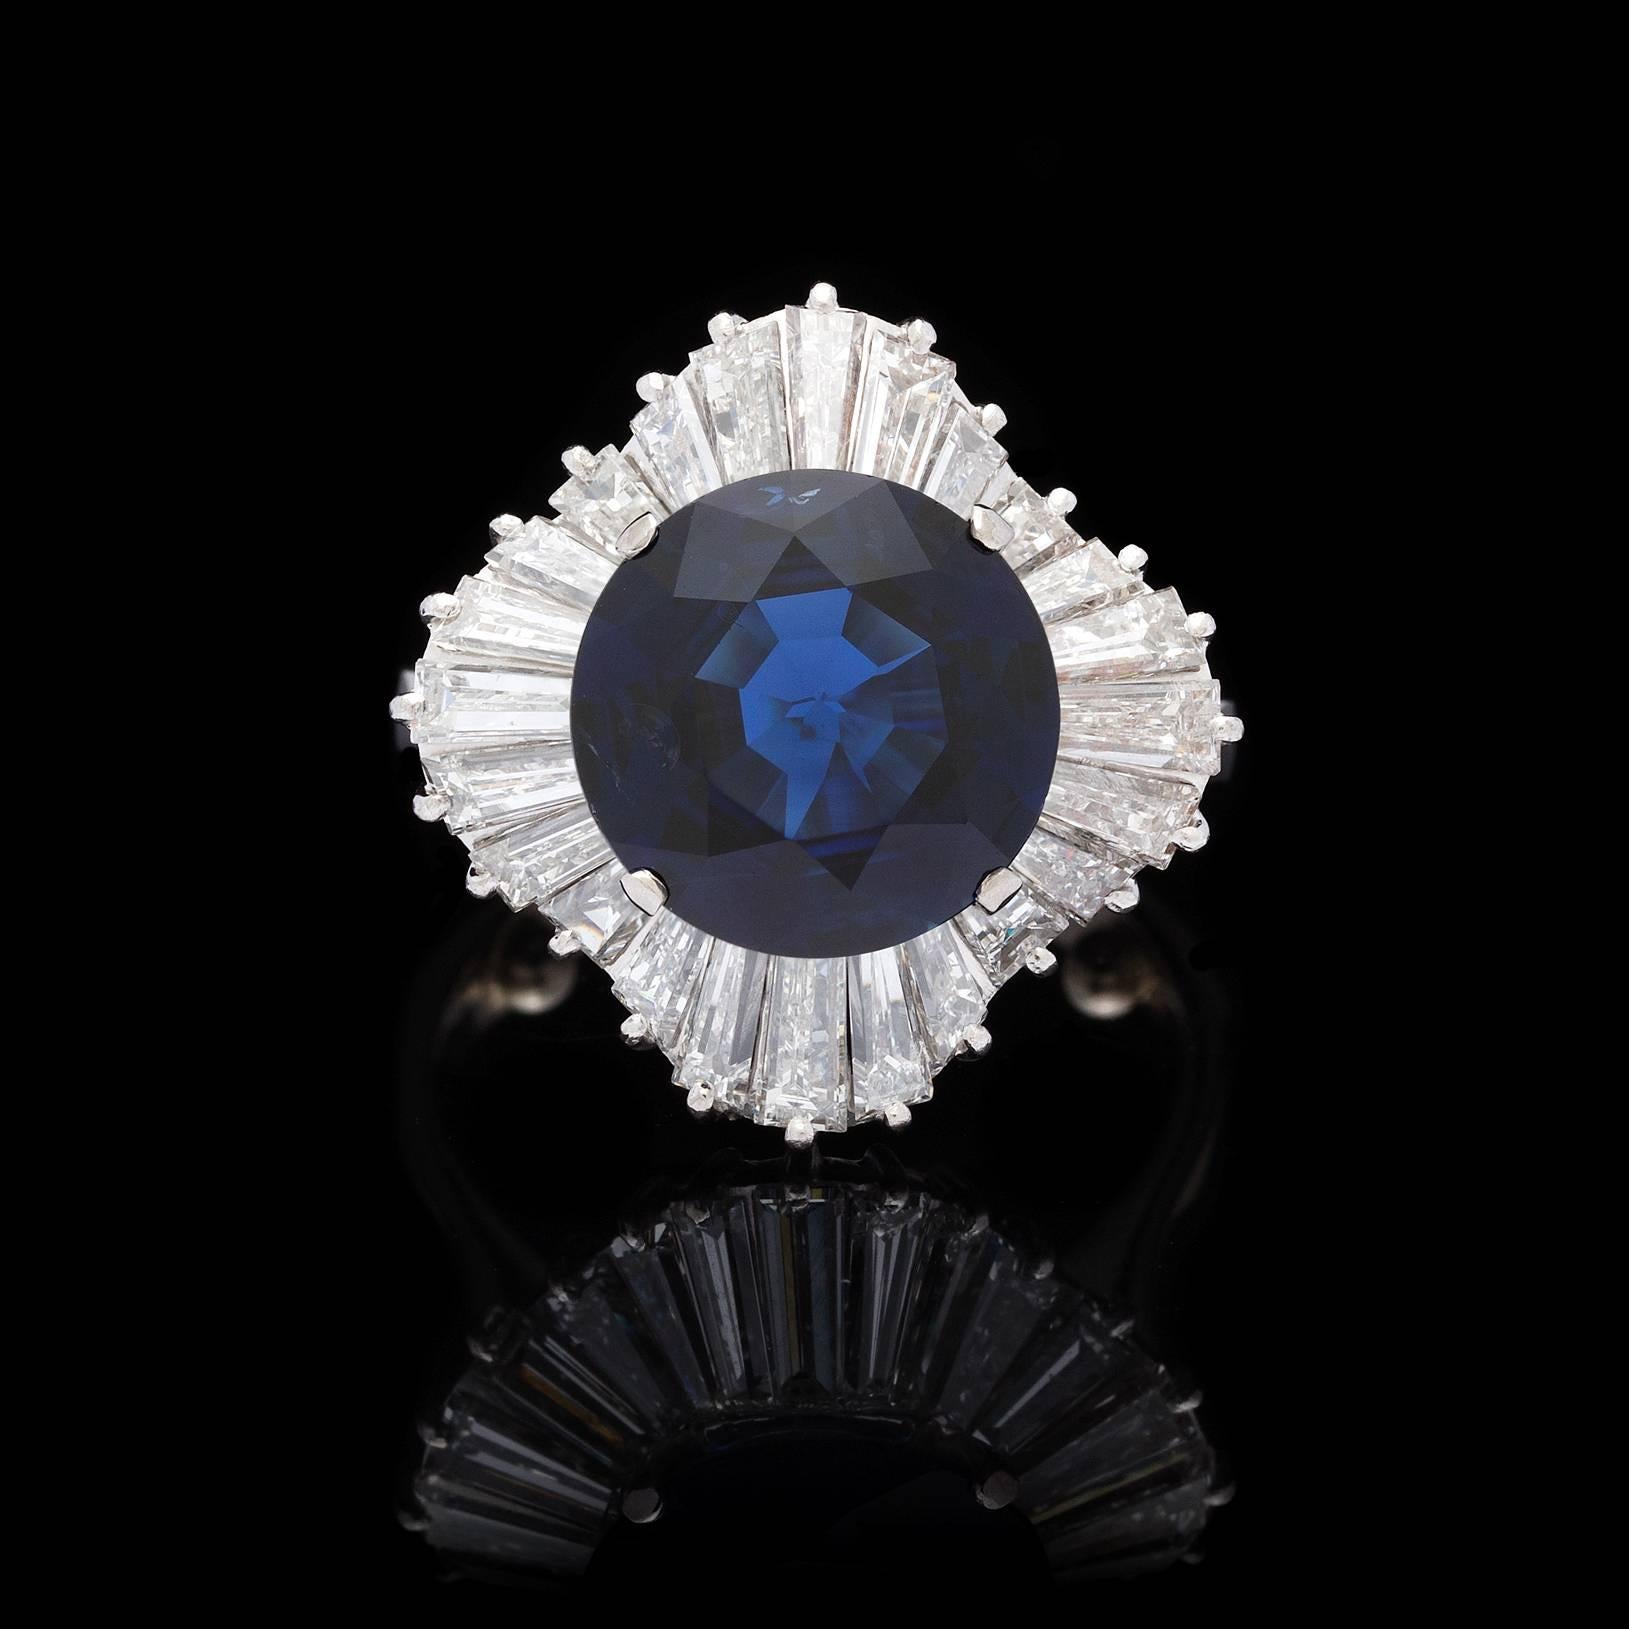 Fantastic vintage 18k white gold ballerina ring featuring a GIA graded round cut 5.39 carat deep blue sapphire in a halo of artfully set tapered baguettes. The 25 diamonds of substantial size total 3.00 carat total weight. The ring is approximately